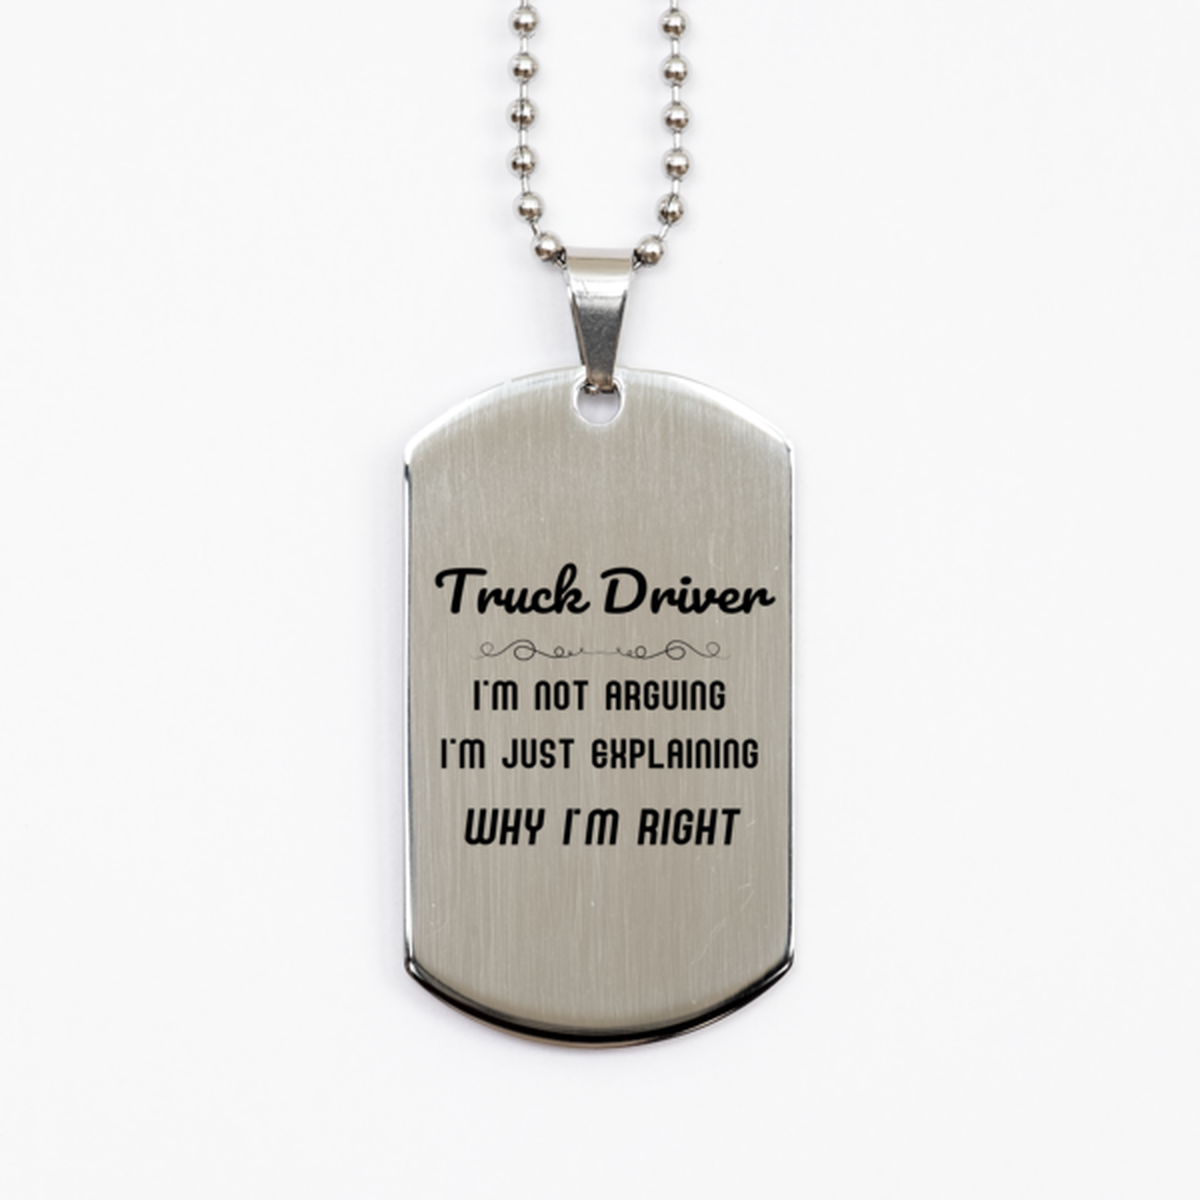 Truck Driver I'm not Arguing. I'm Just Explaining Why I'm RIGHT Silver Dog Tag, Funny Saying Quote Truck Driver Gifts For Truck Driver Graduation Birthday Christmas Gifts for Men Women Coworker